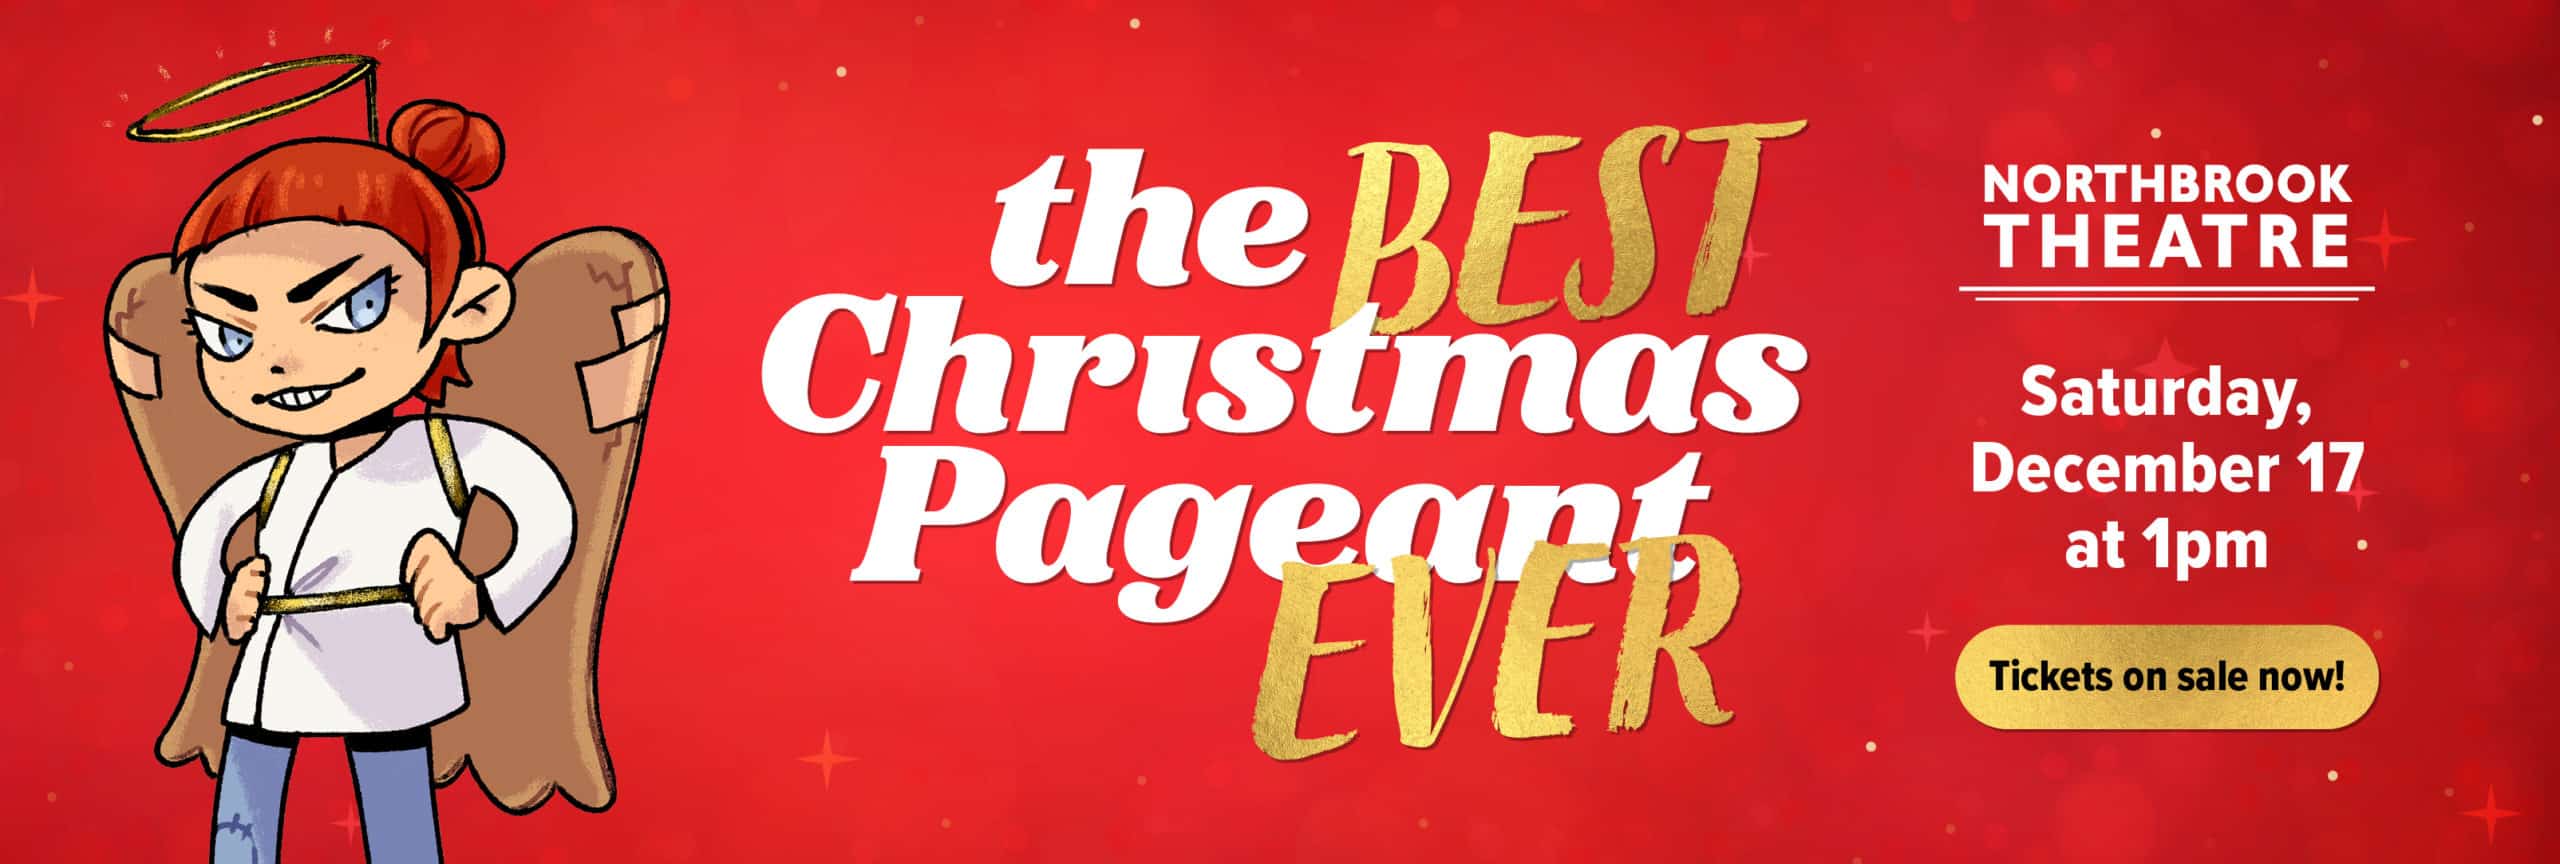 The Best Christmas Pageant Ever - Tickets on Sale Now